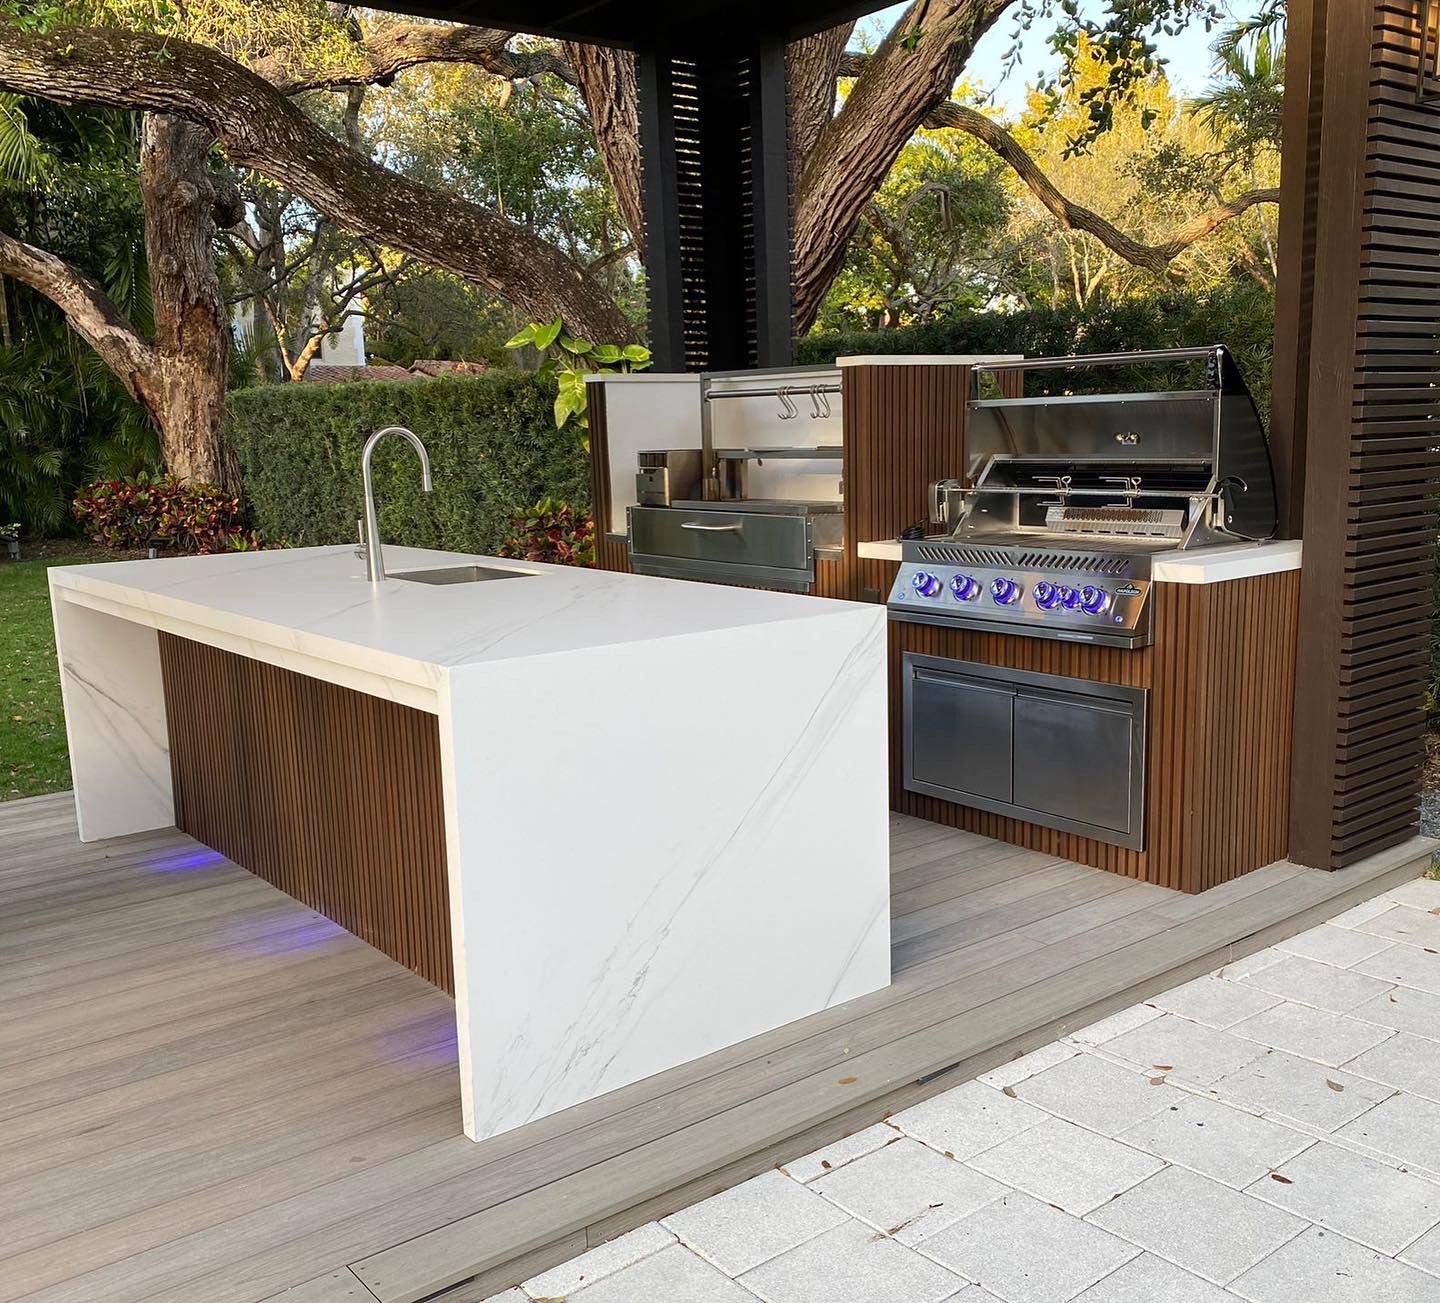 USA MADE. Argentine Parrilla Grill Drop-in for Countertops. 